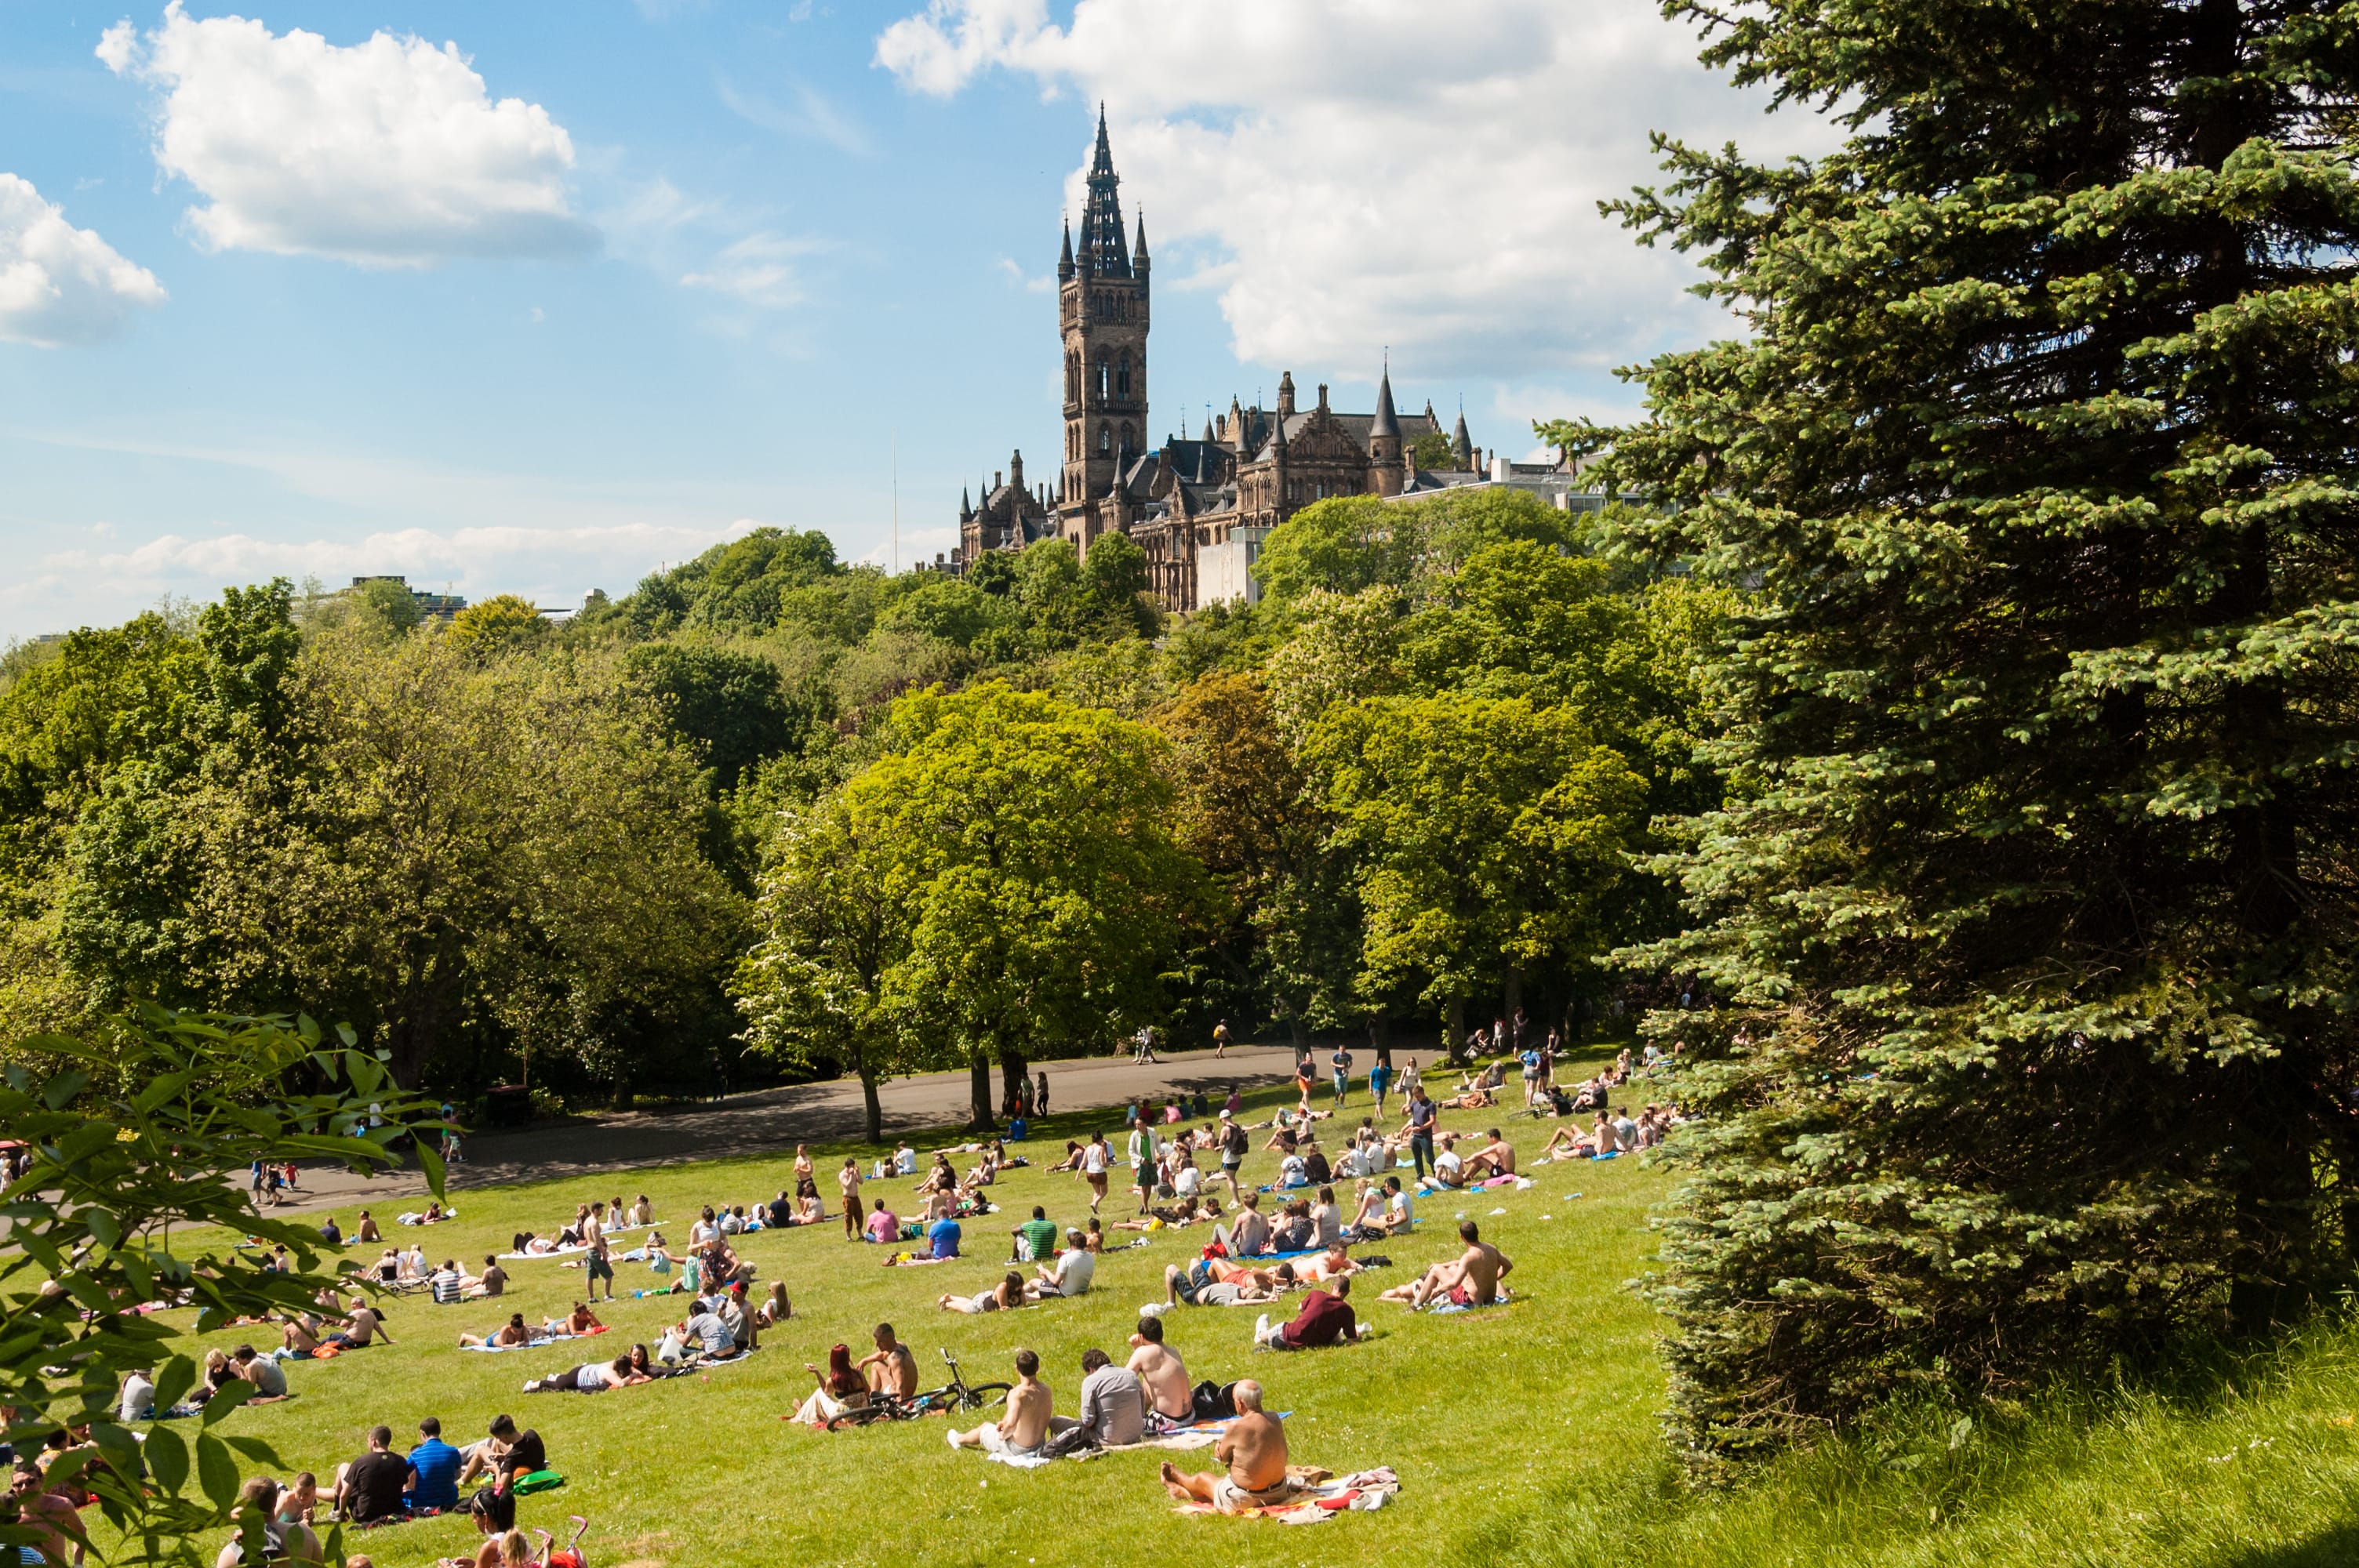 View of Kelvingrove Park with people and the Glasgow University